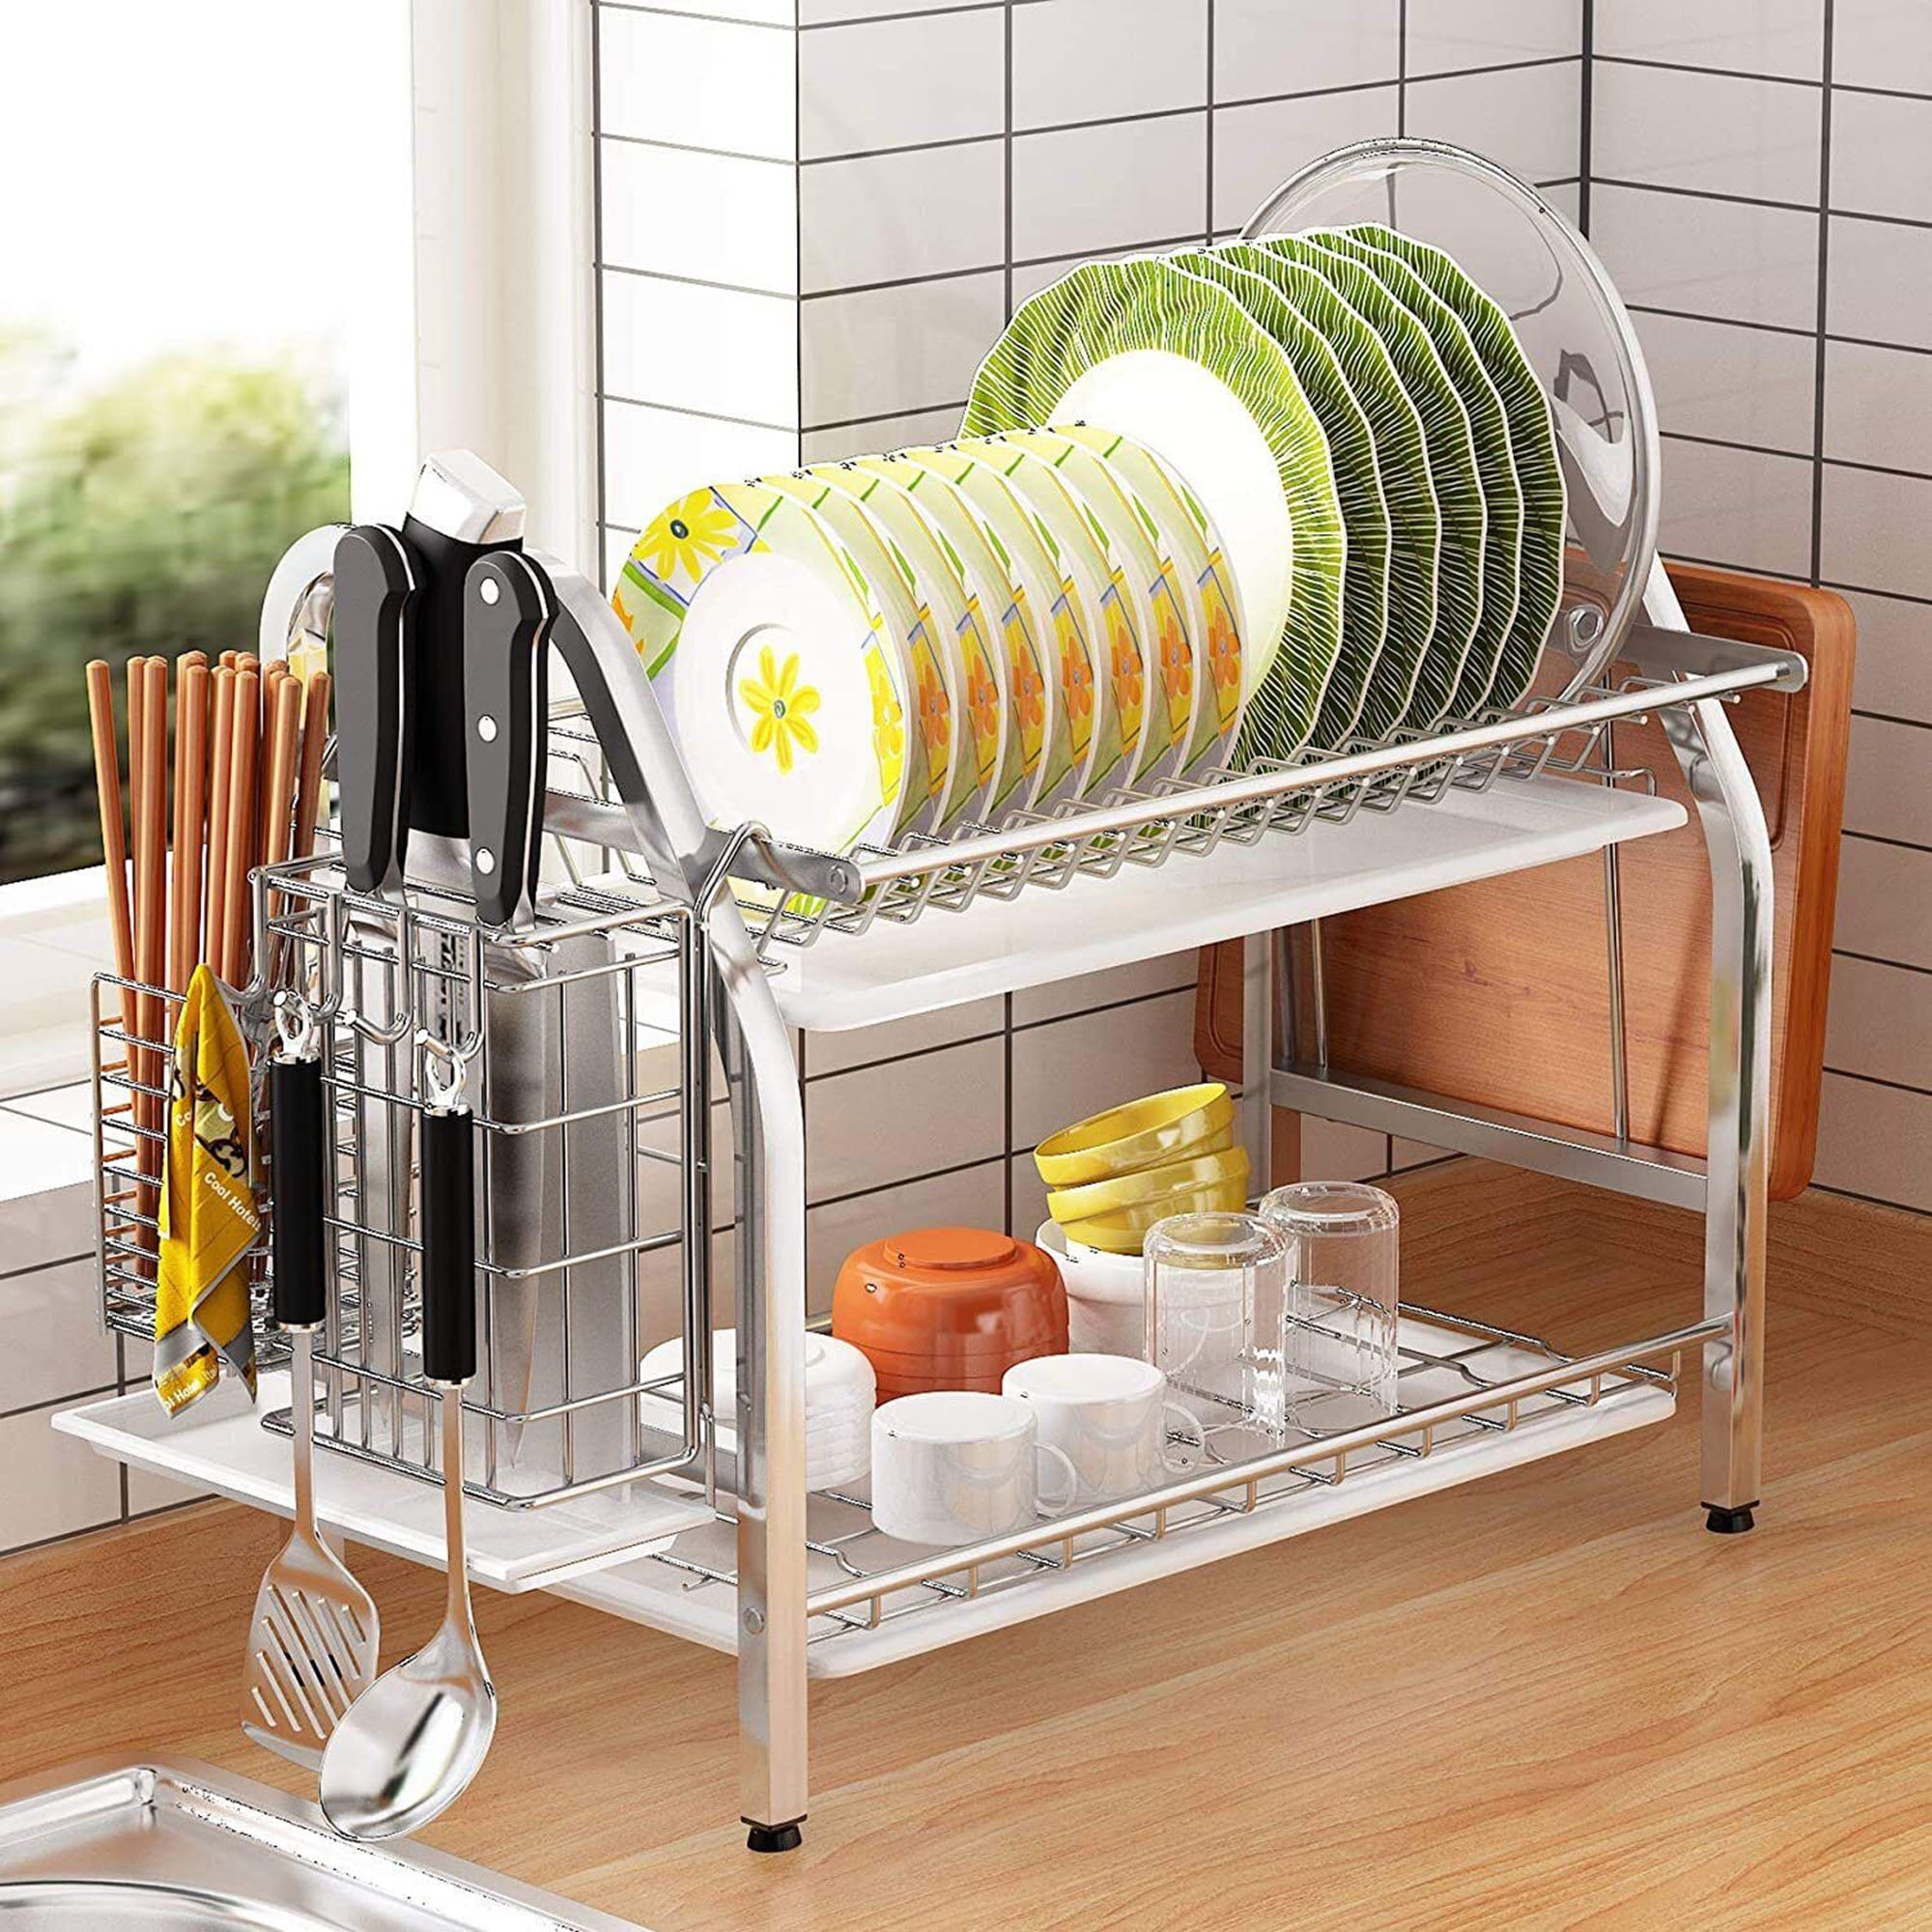 DODOING Drain Drainer,Over The Sink Dish Drying Rack,Dish Rack